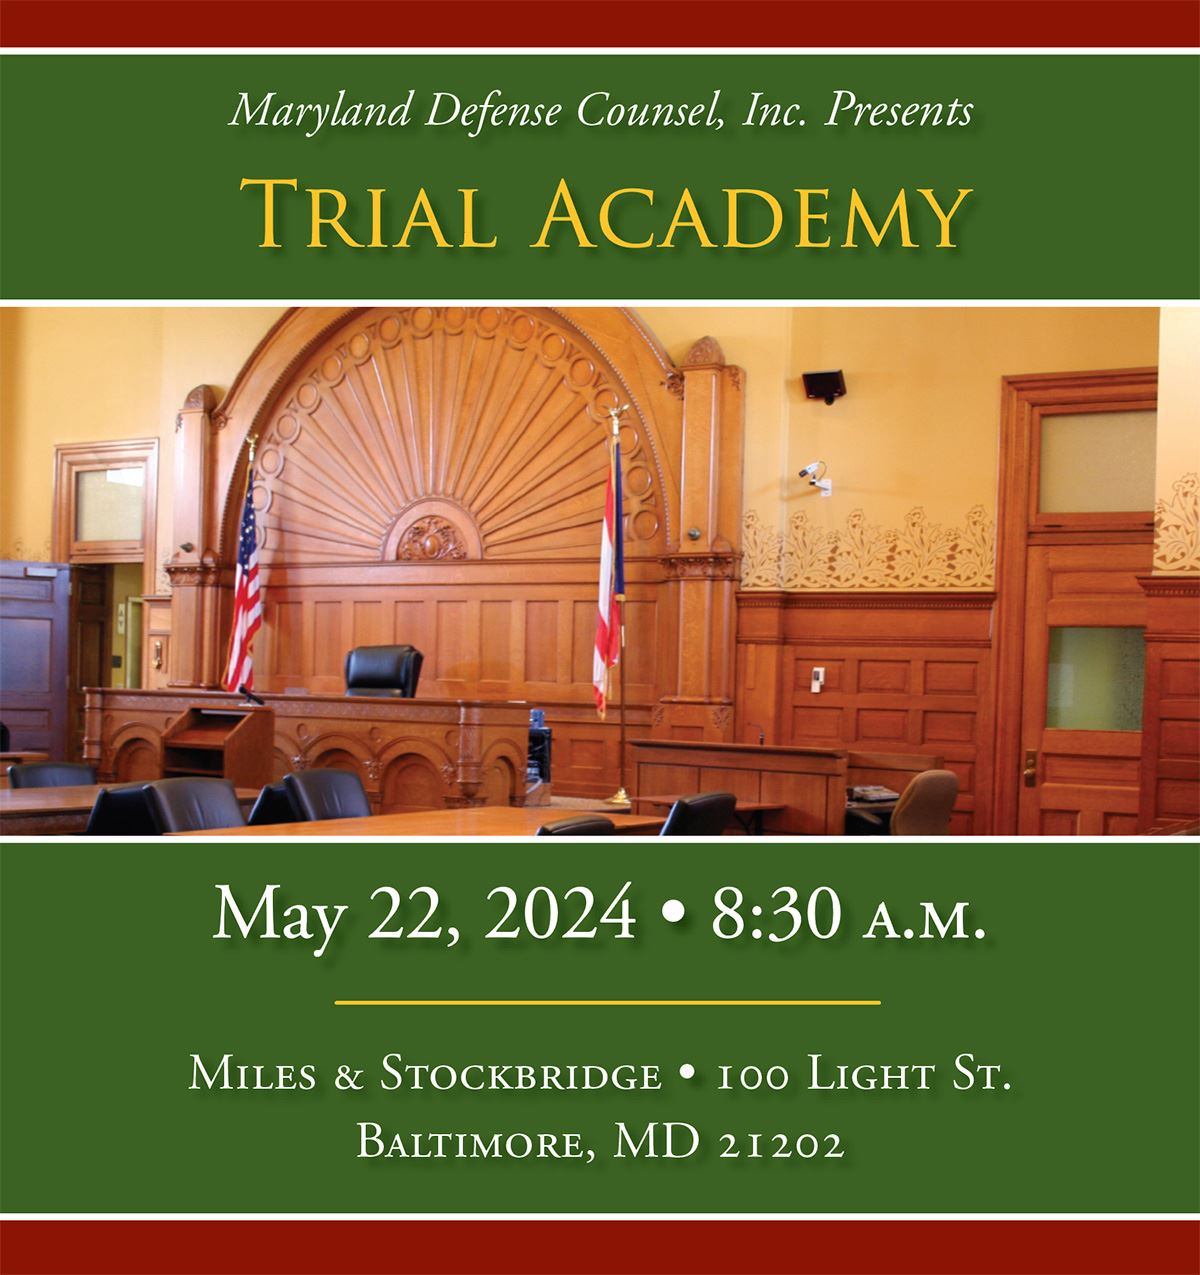 MDC Presents: Trial Academy, May 22, 2024, 8:30am, Miles & Stockbridge, Baltimore, MD